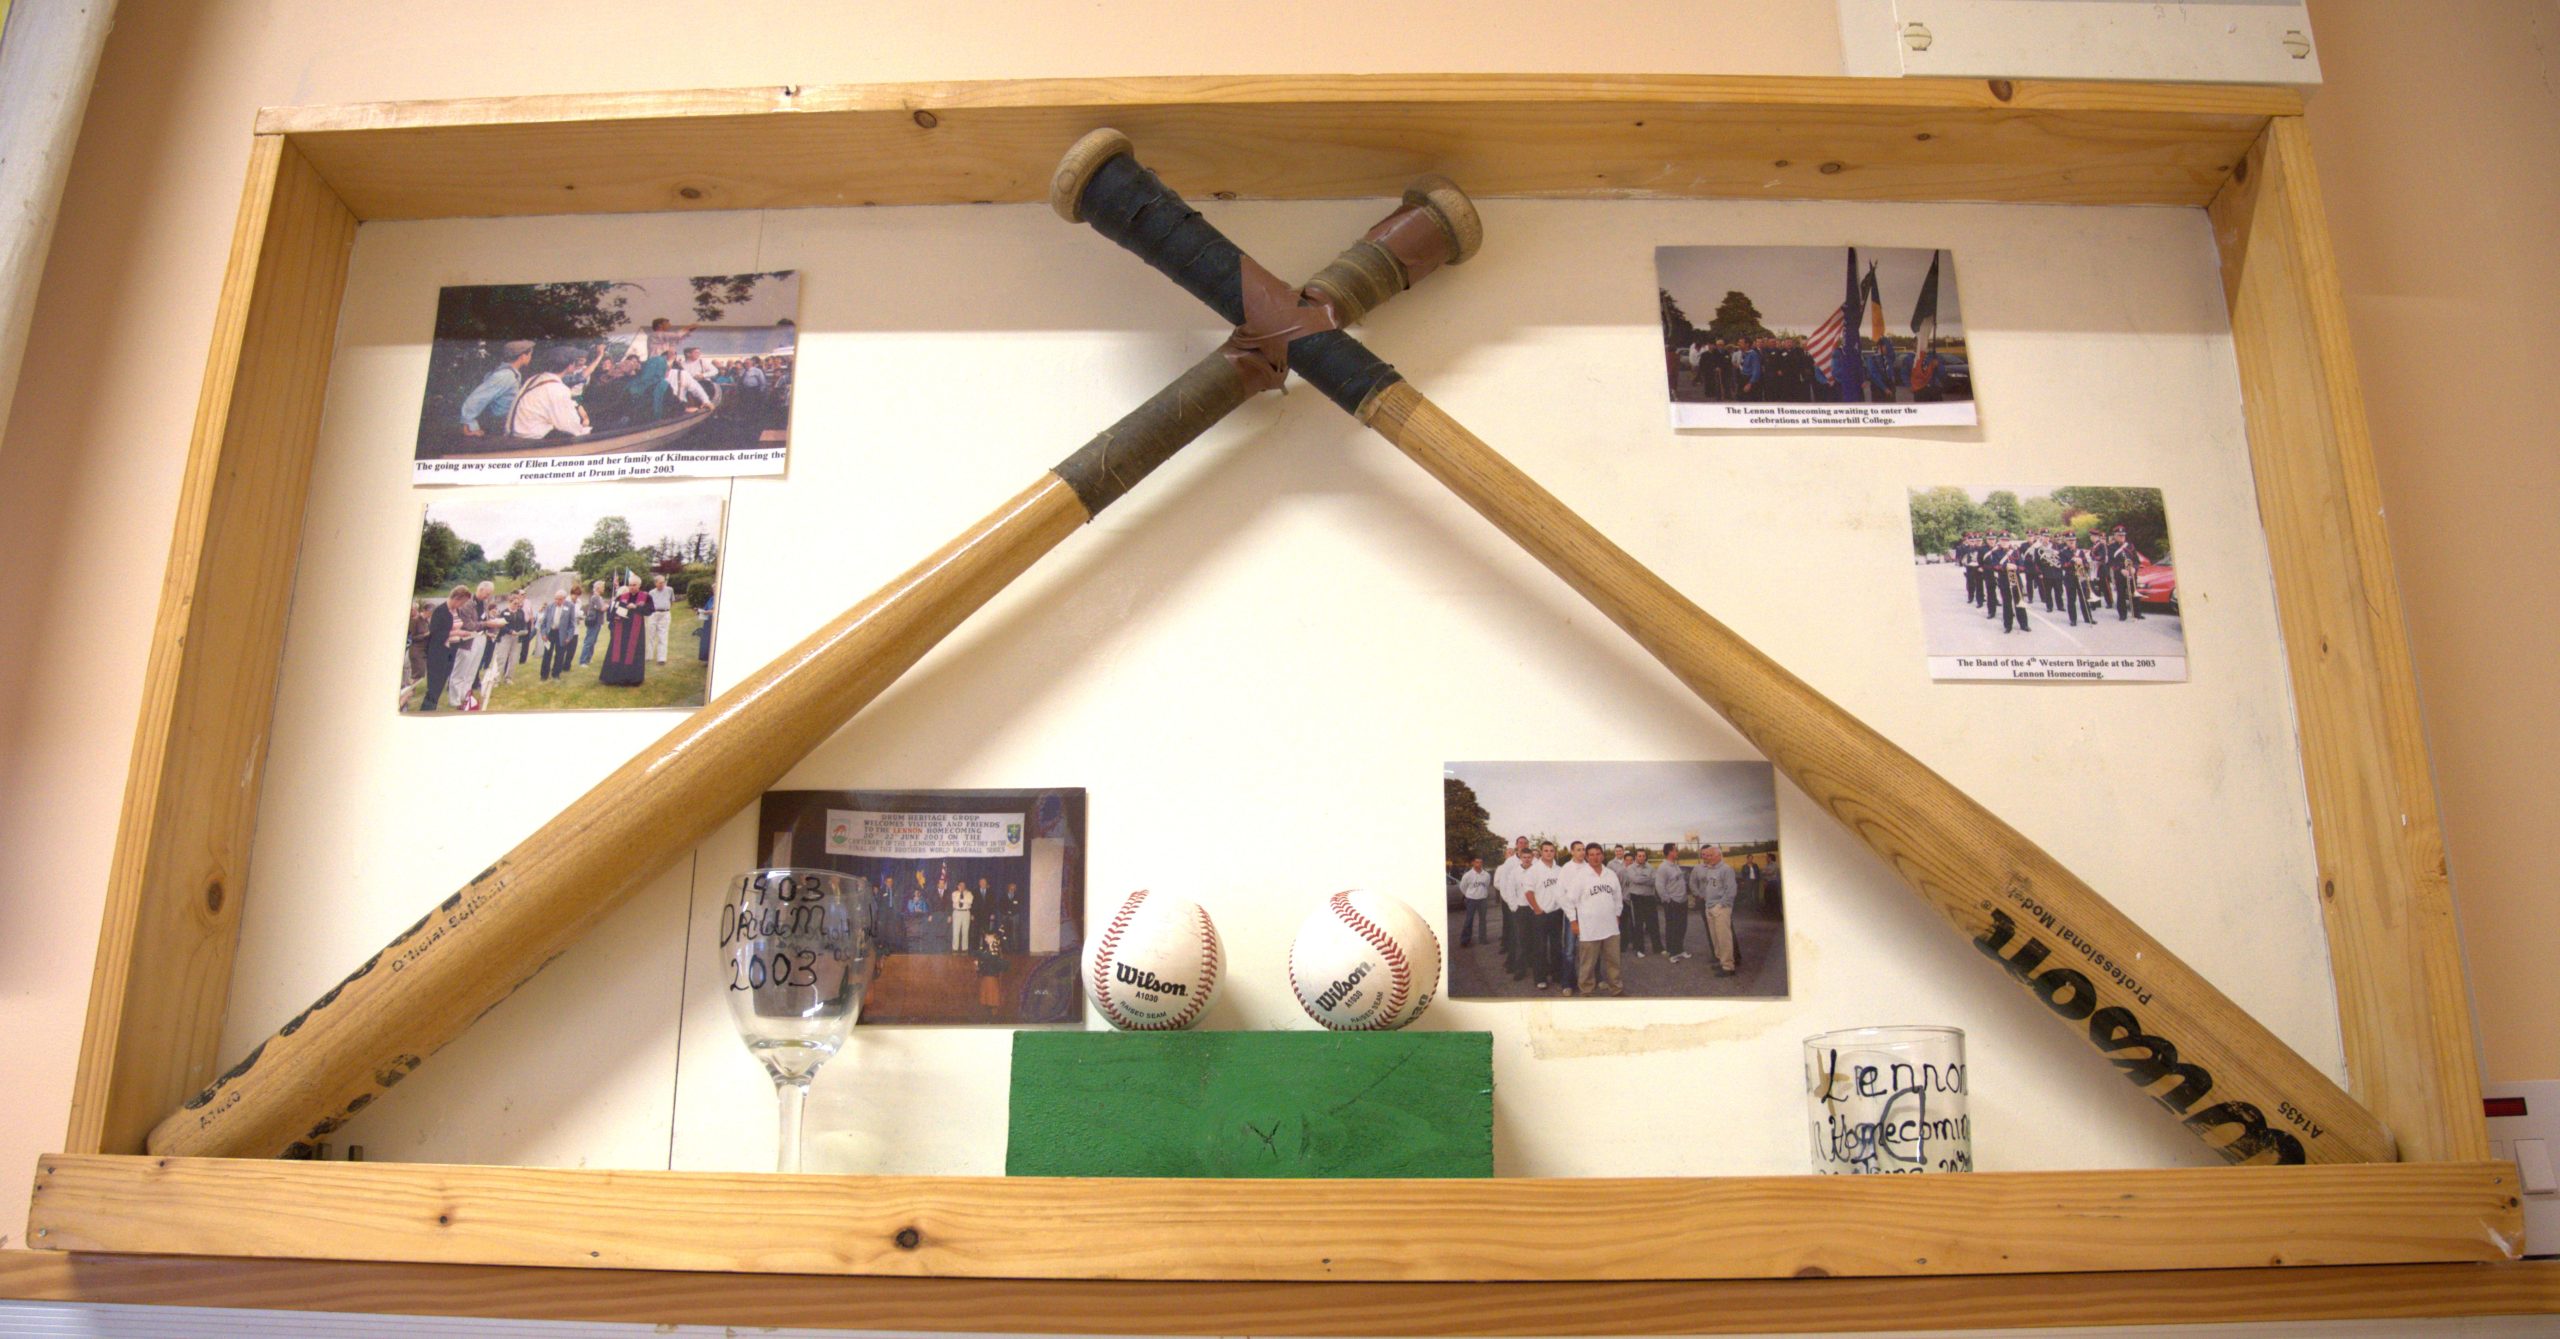 Drum Heritage Centre baseball connection